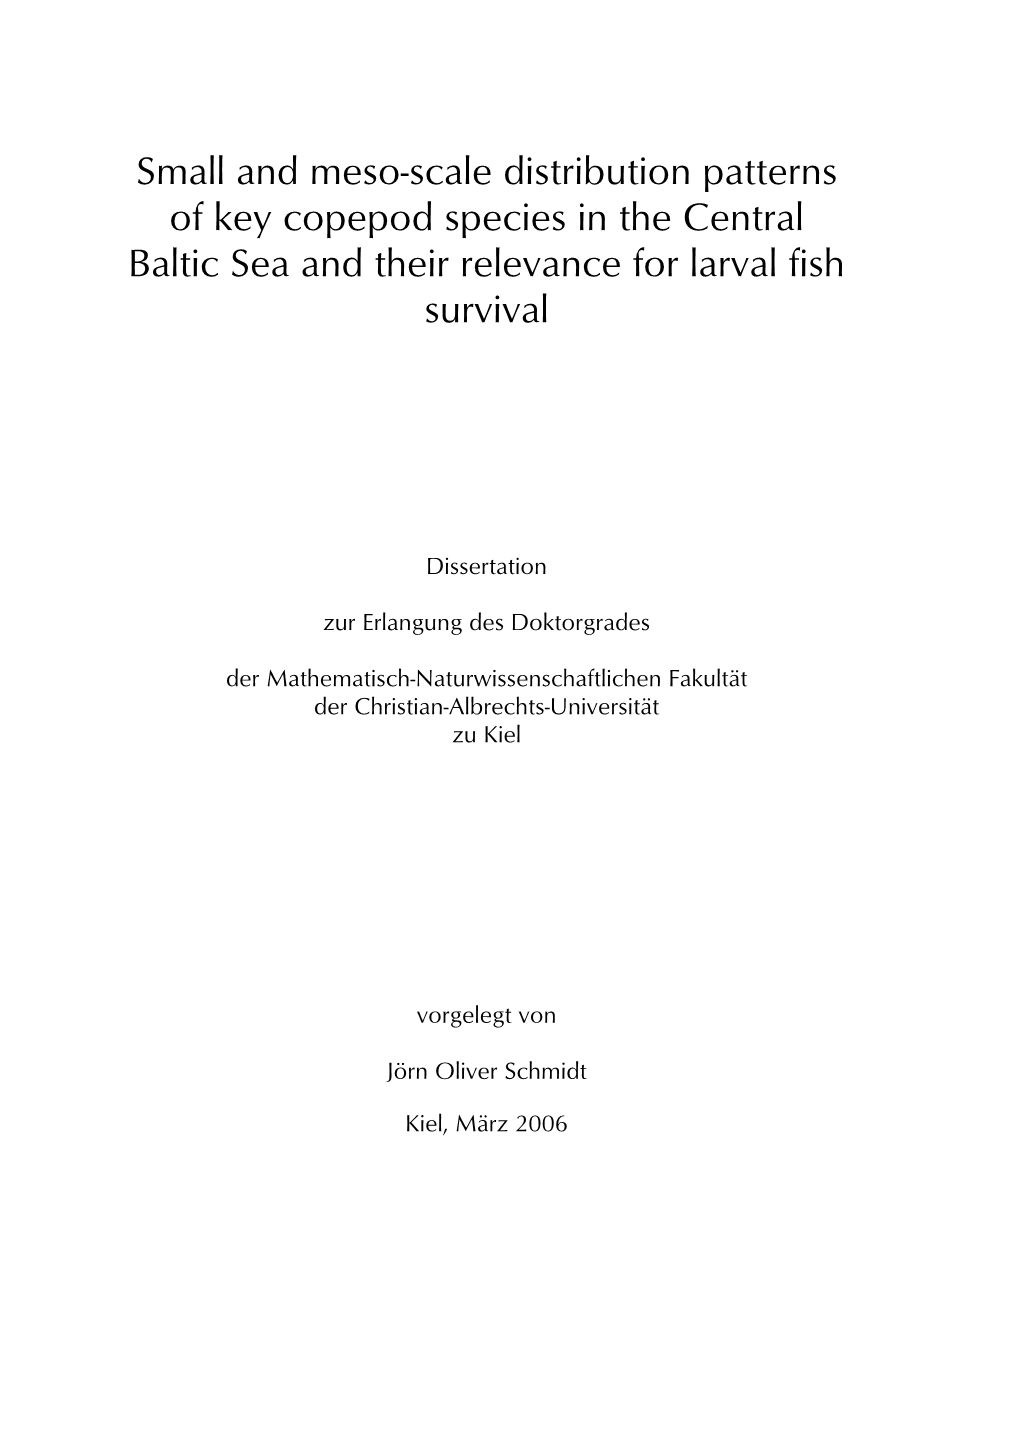 Small and Meso-Scale Distribution Patterns of Key Copepod Species in the Central Baltic Sea and Their Relevance for Larval Fish